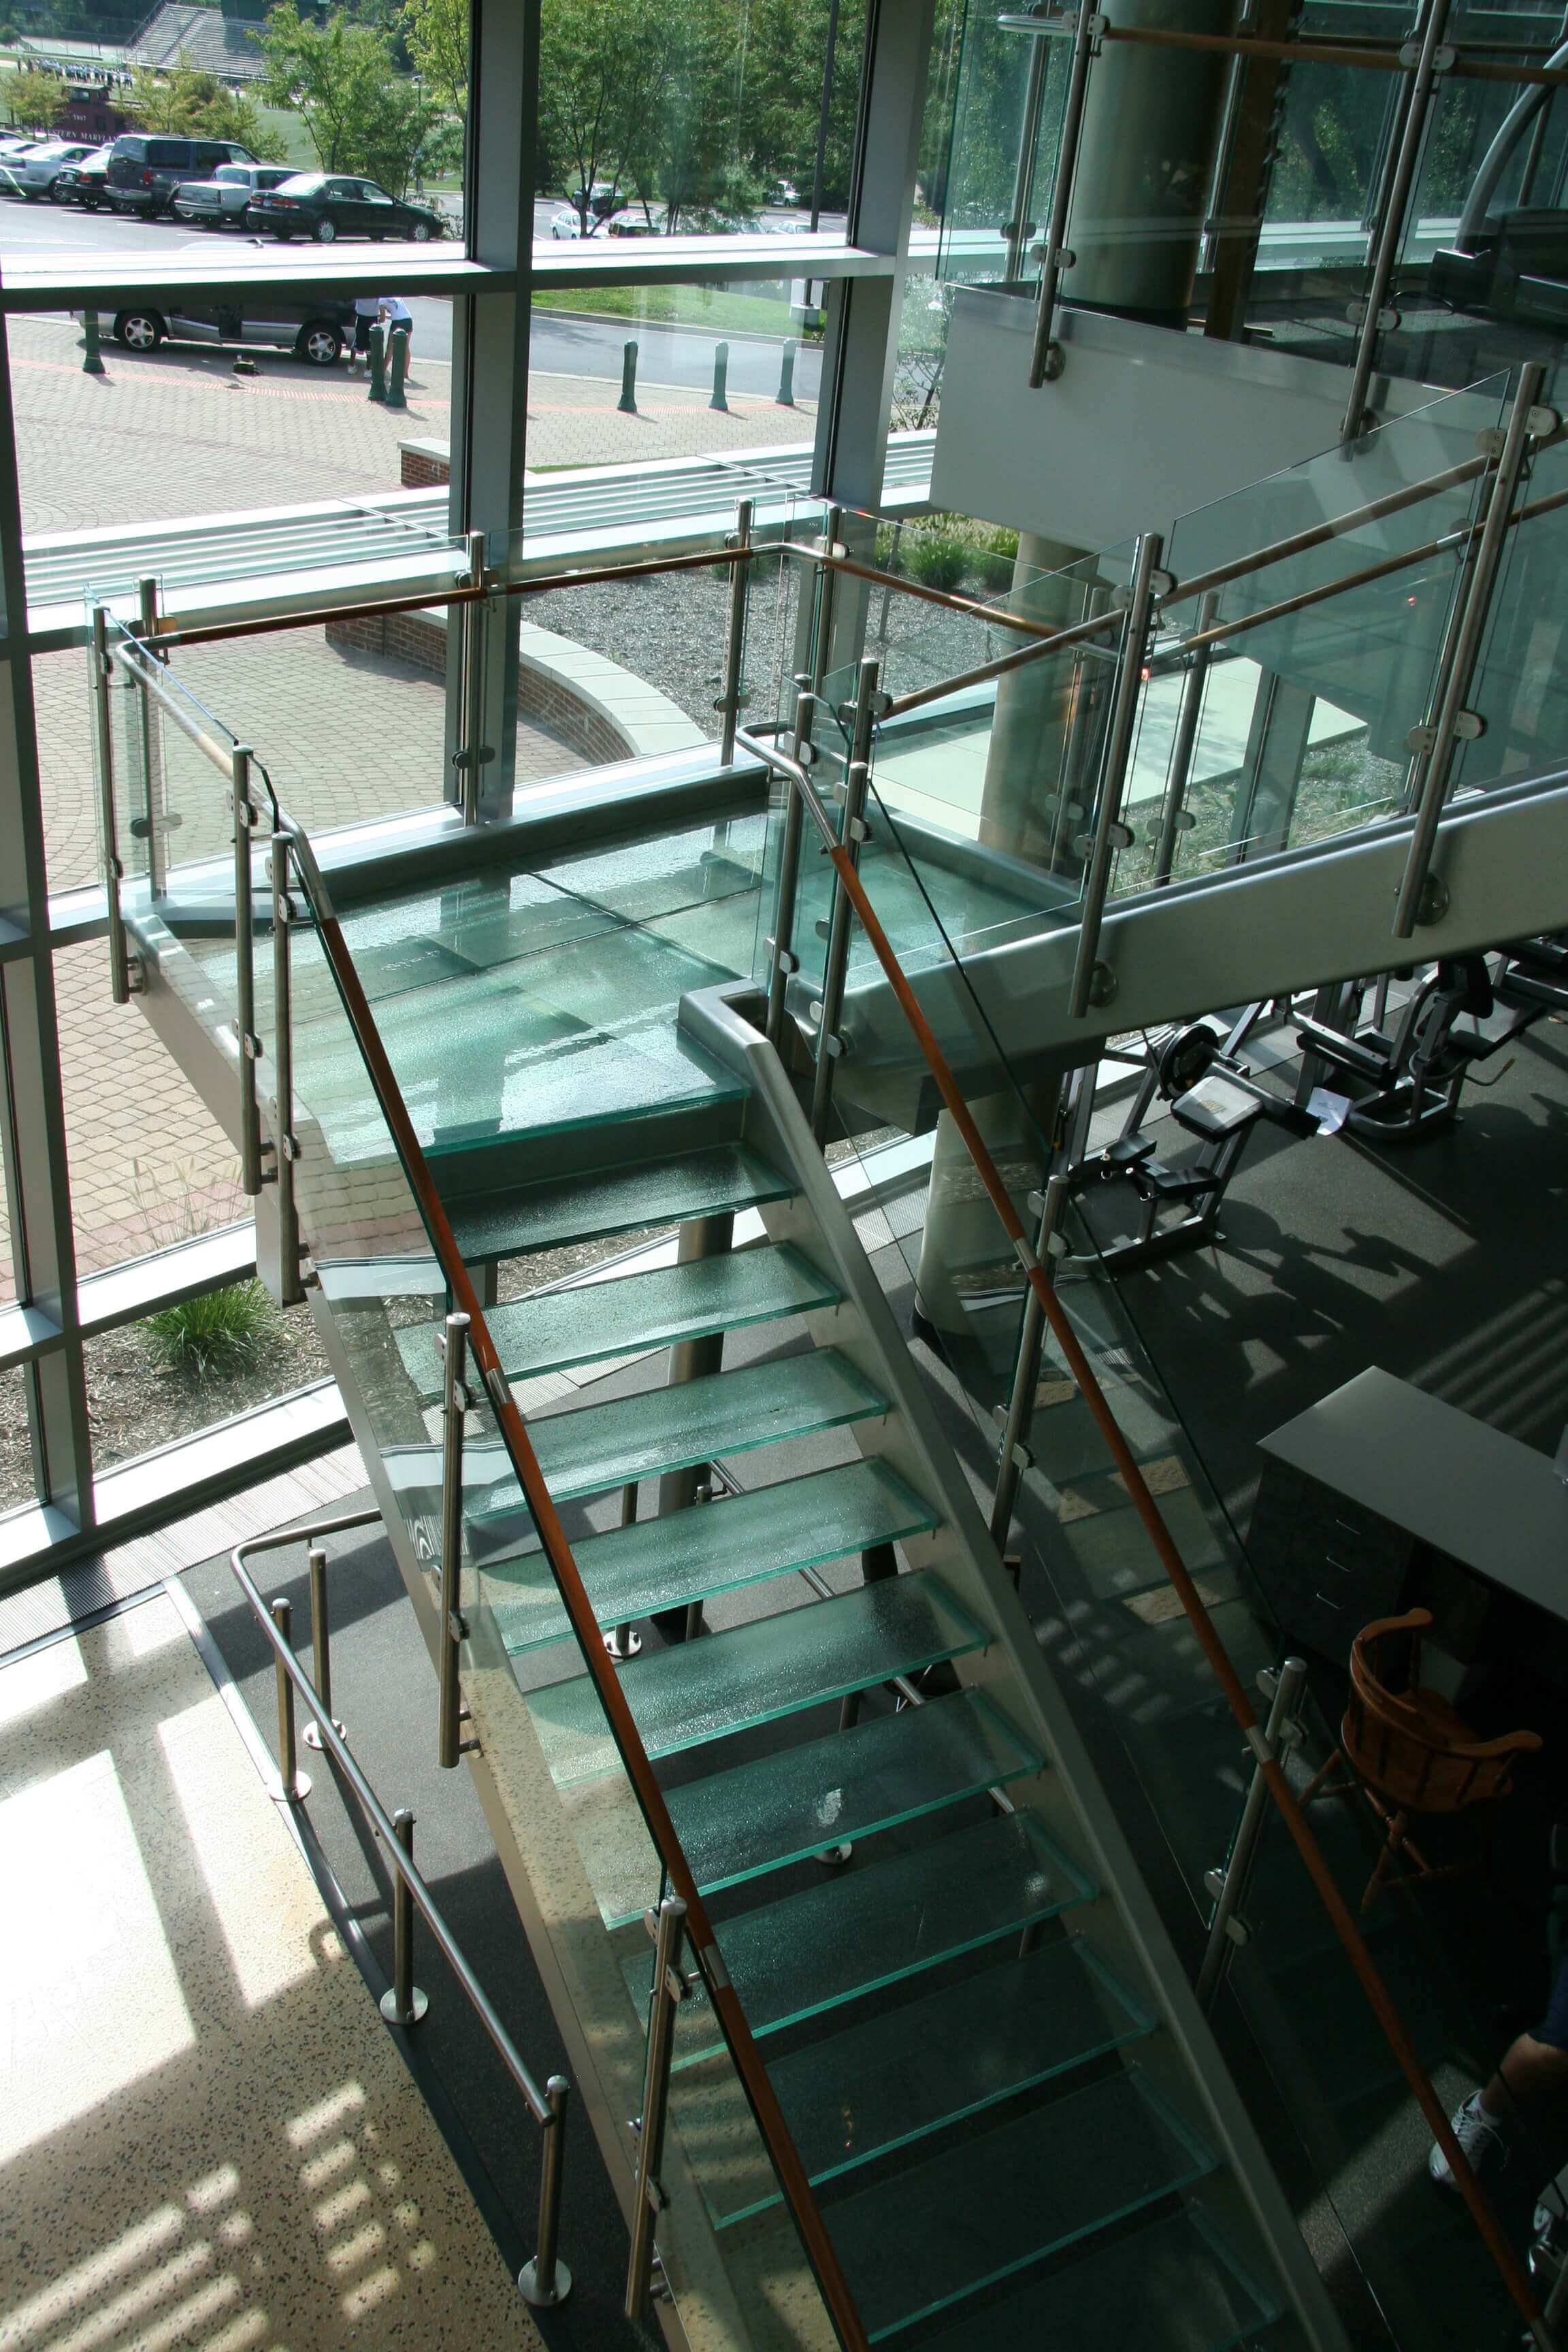 Circum round guardrail with glass infill and wood top rail at McDaniels College, MD